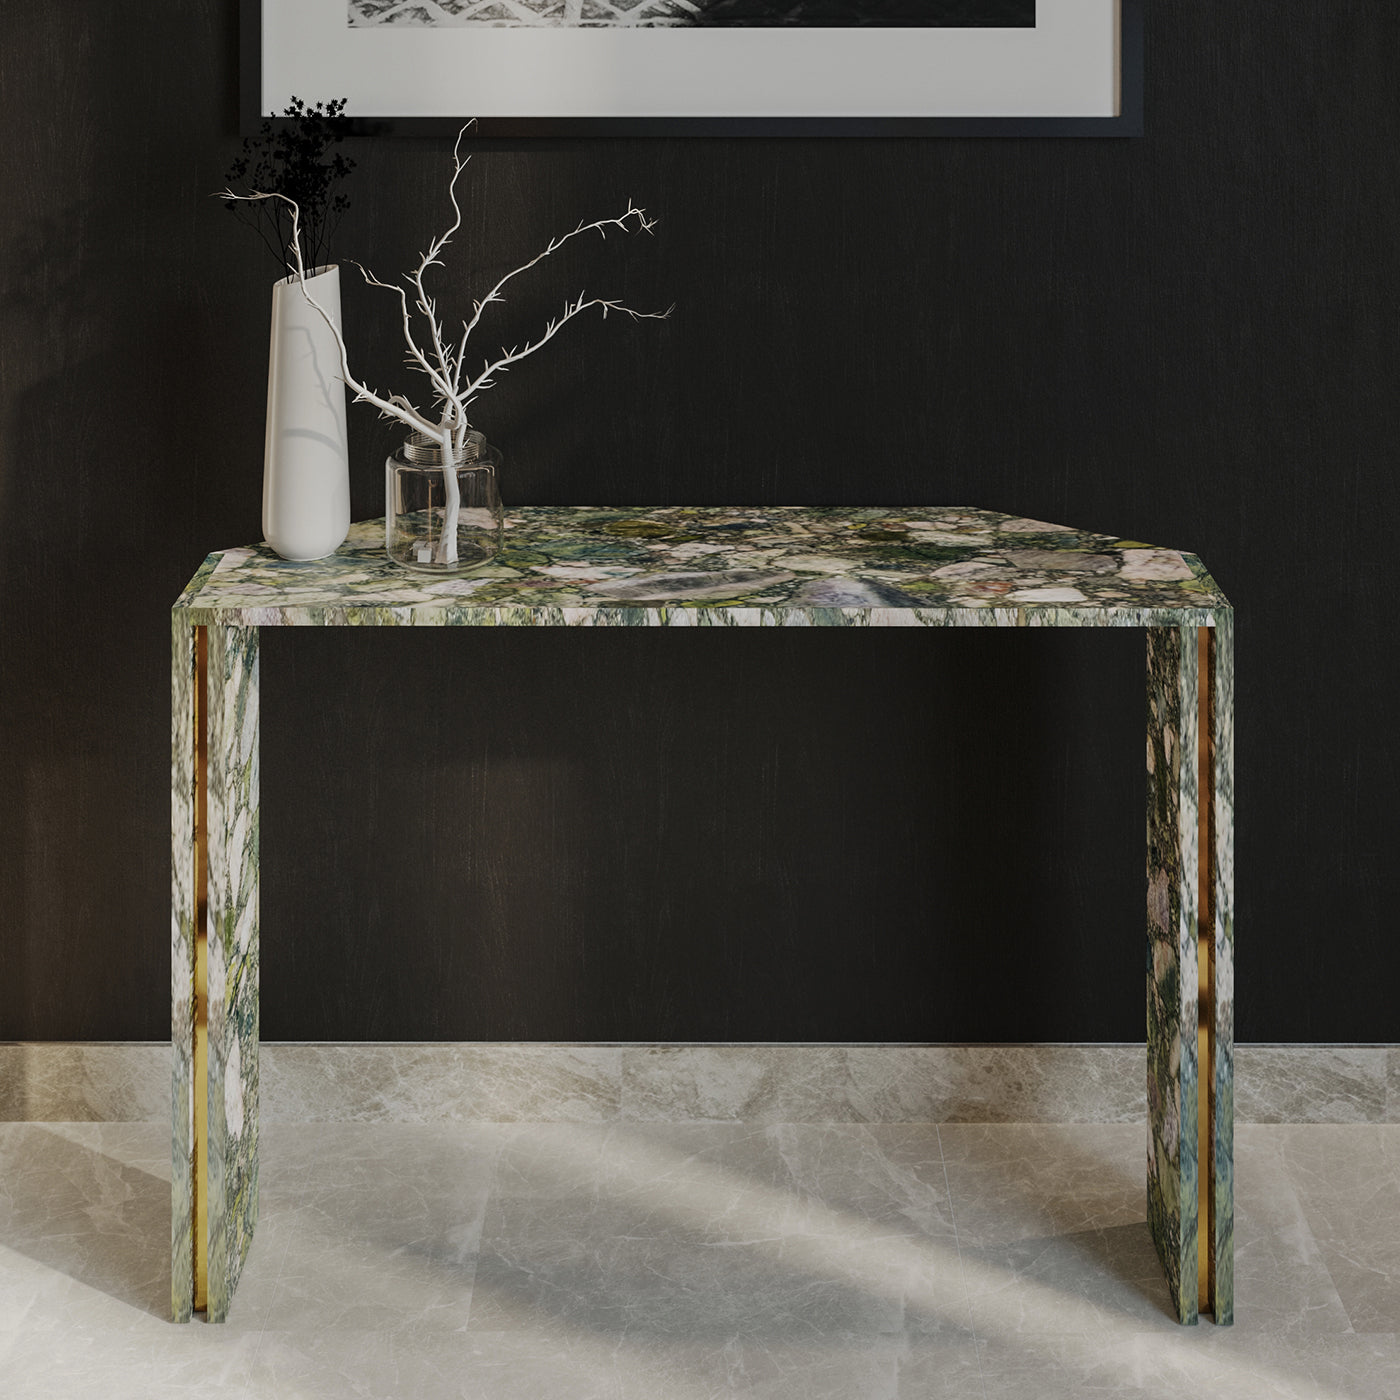 Innis Marinace Verde Marble Console by Paolo Ciacci - Alternative view 1